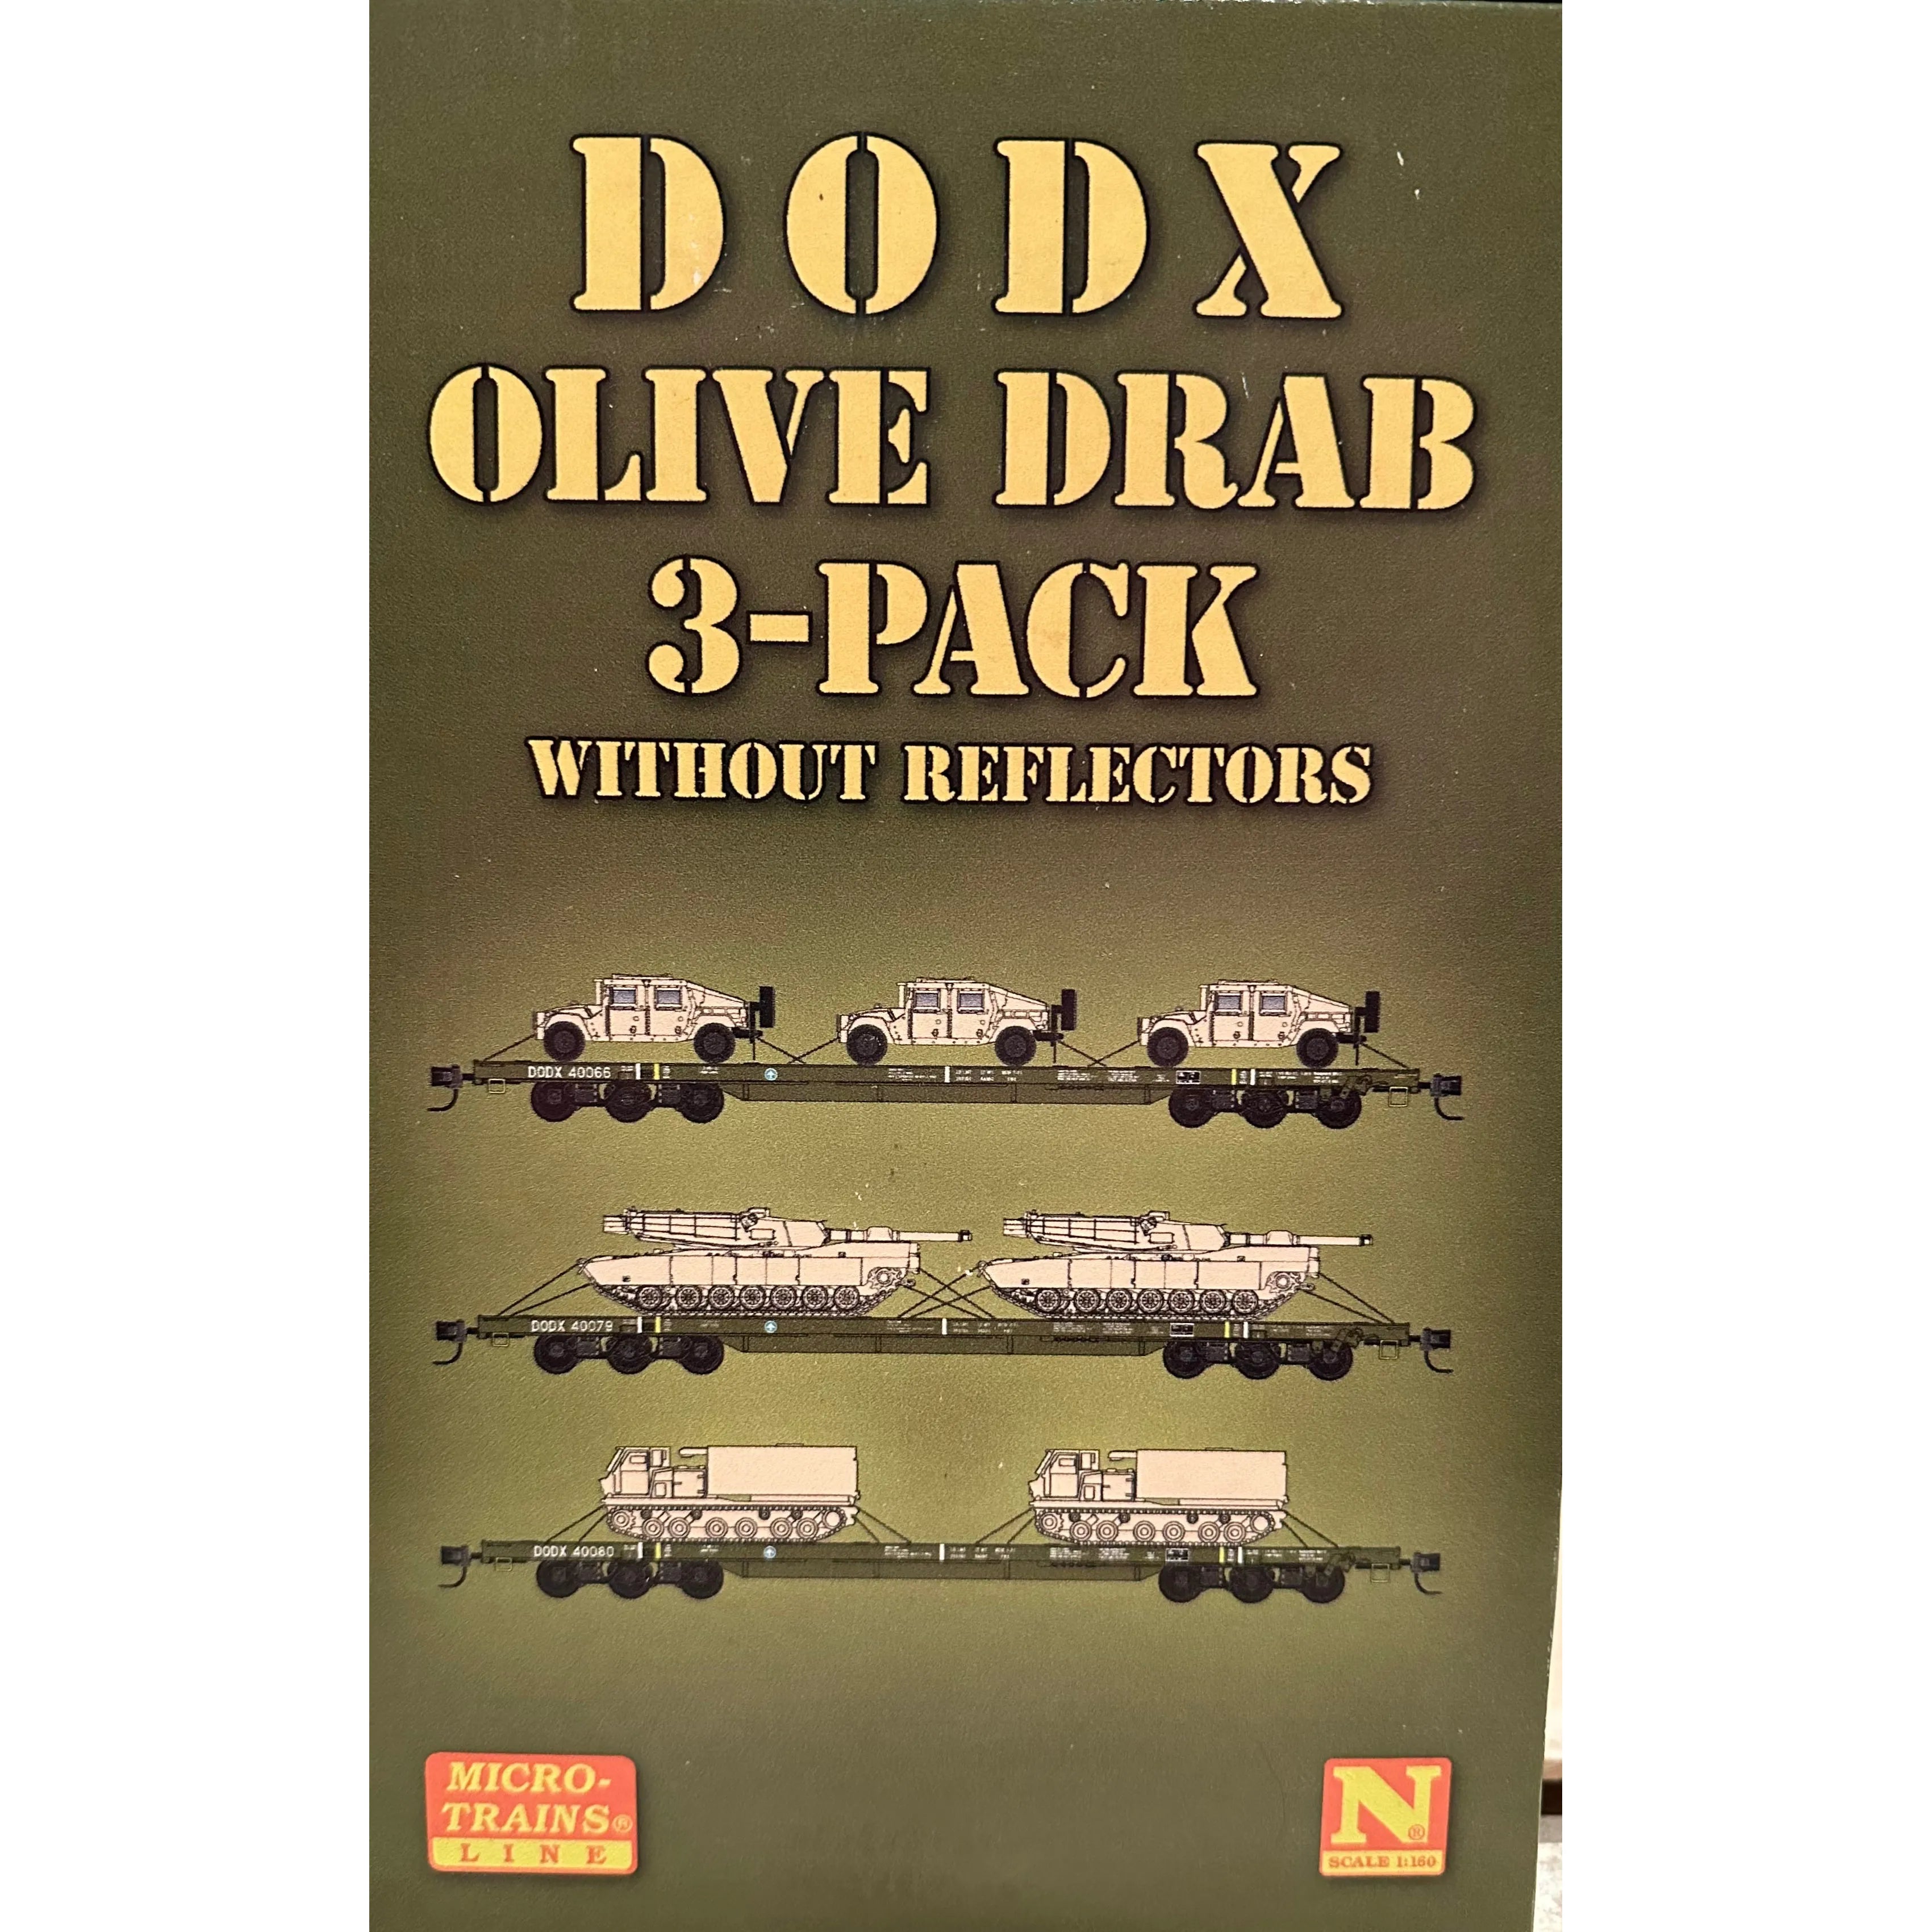 Micro-Trains, 993 01 812, N,  Flatcar, 68 Foot, DODX Heavy-Duty - Department of Defense - 3-Pack